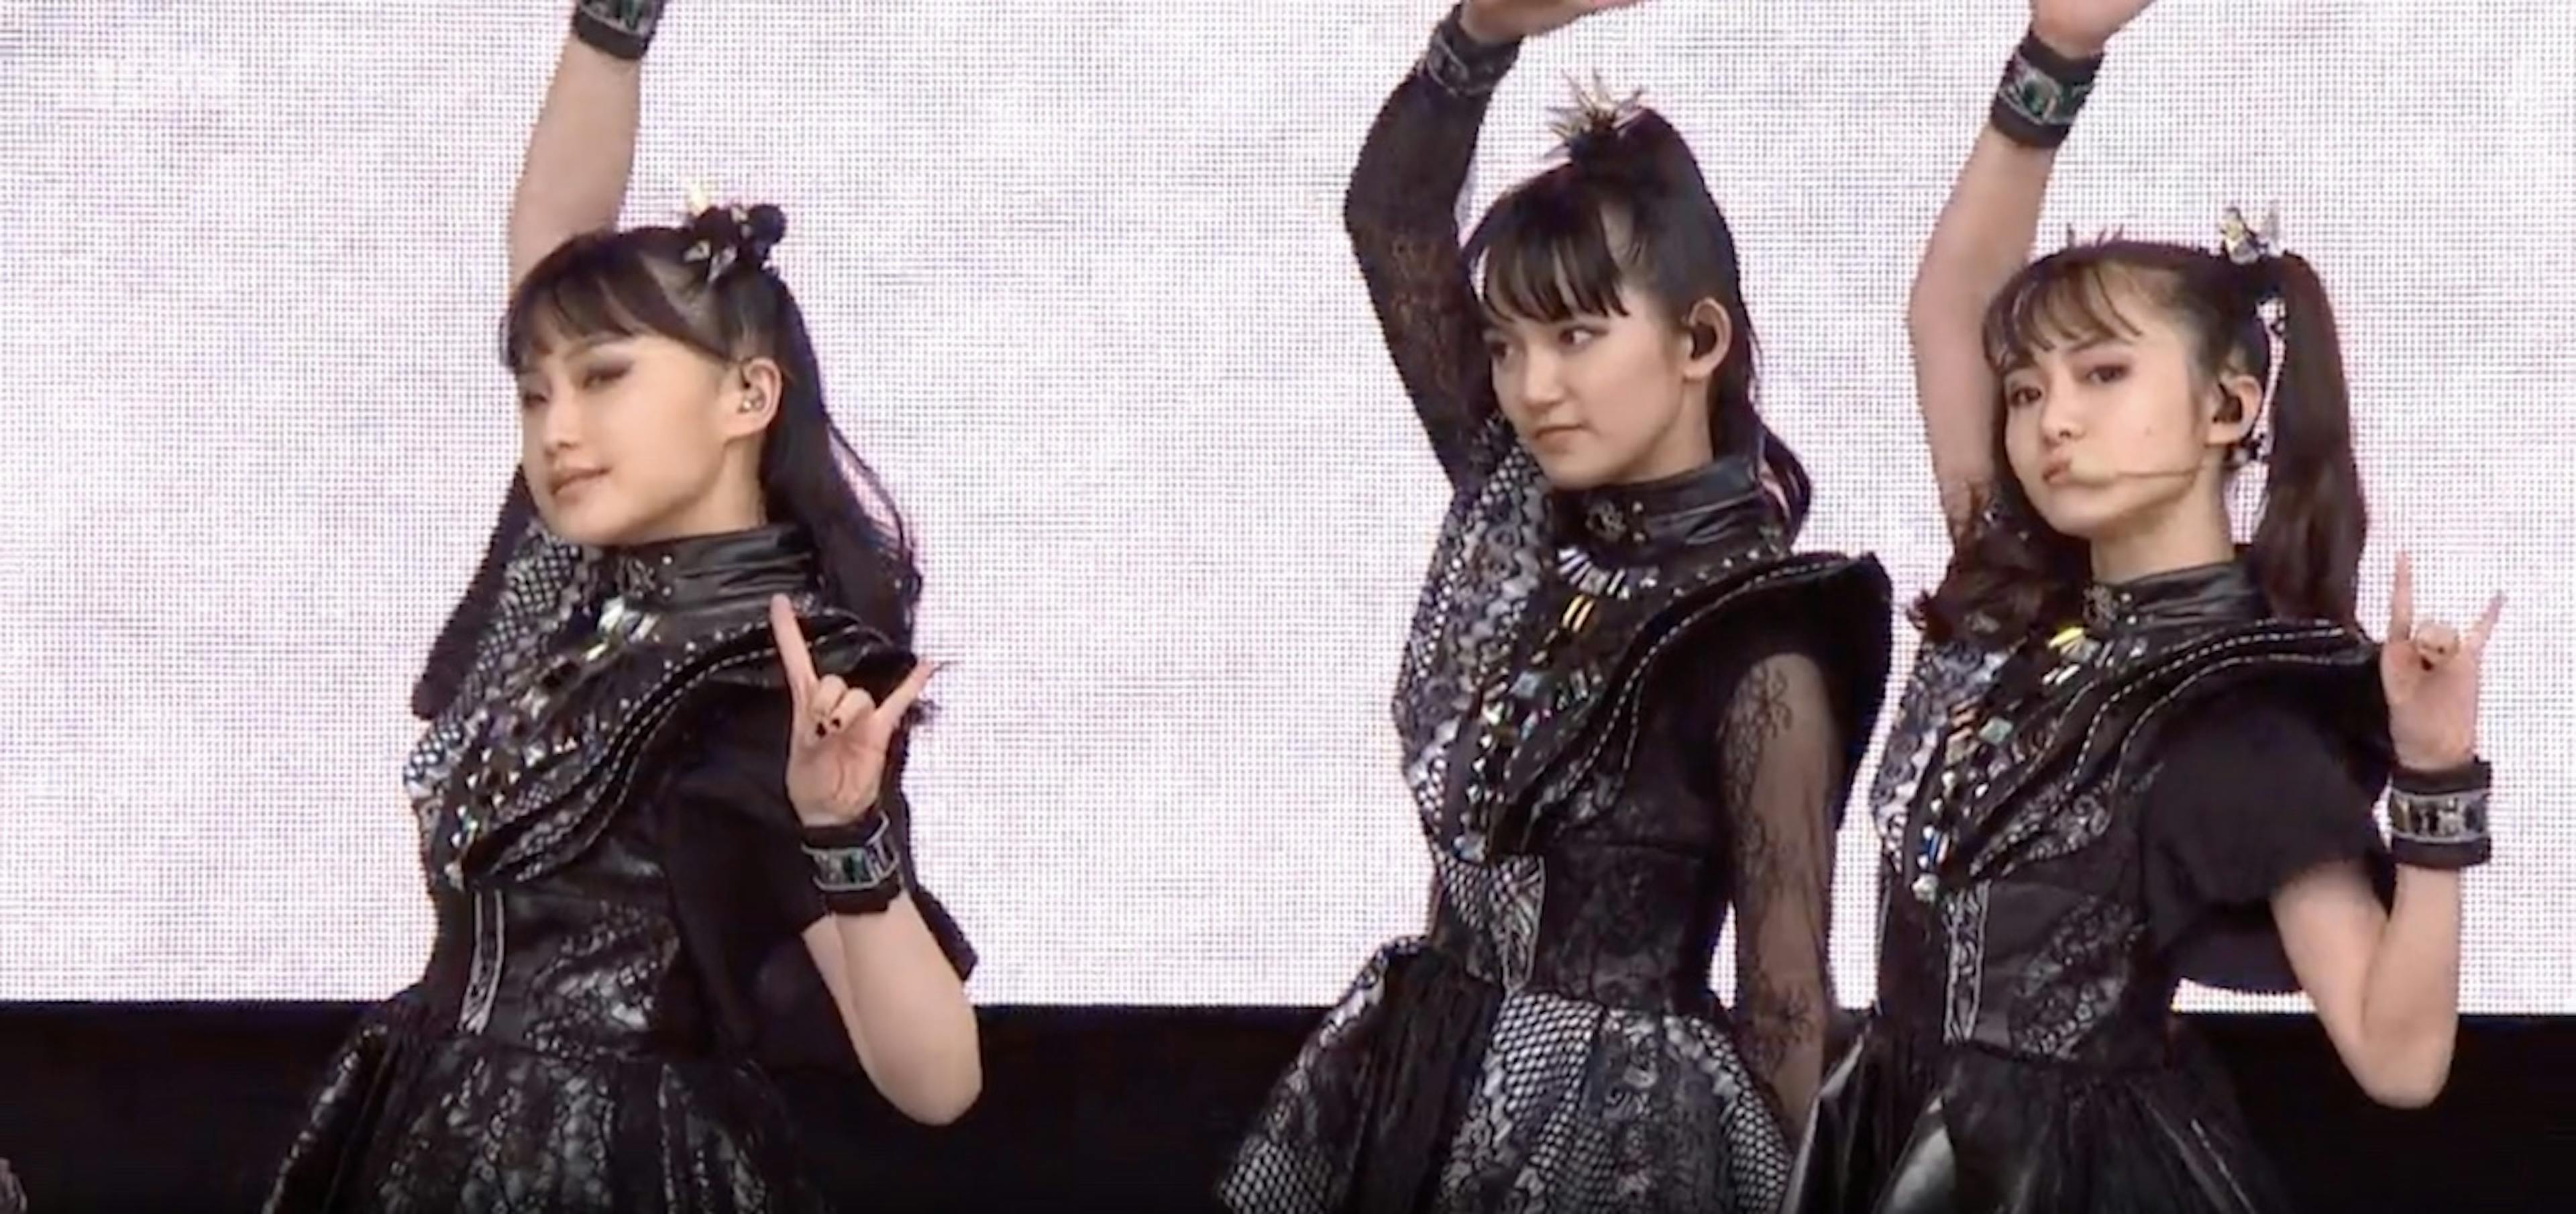 New Member Appears With BABYMETAL At Glastonbury?